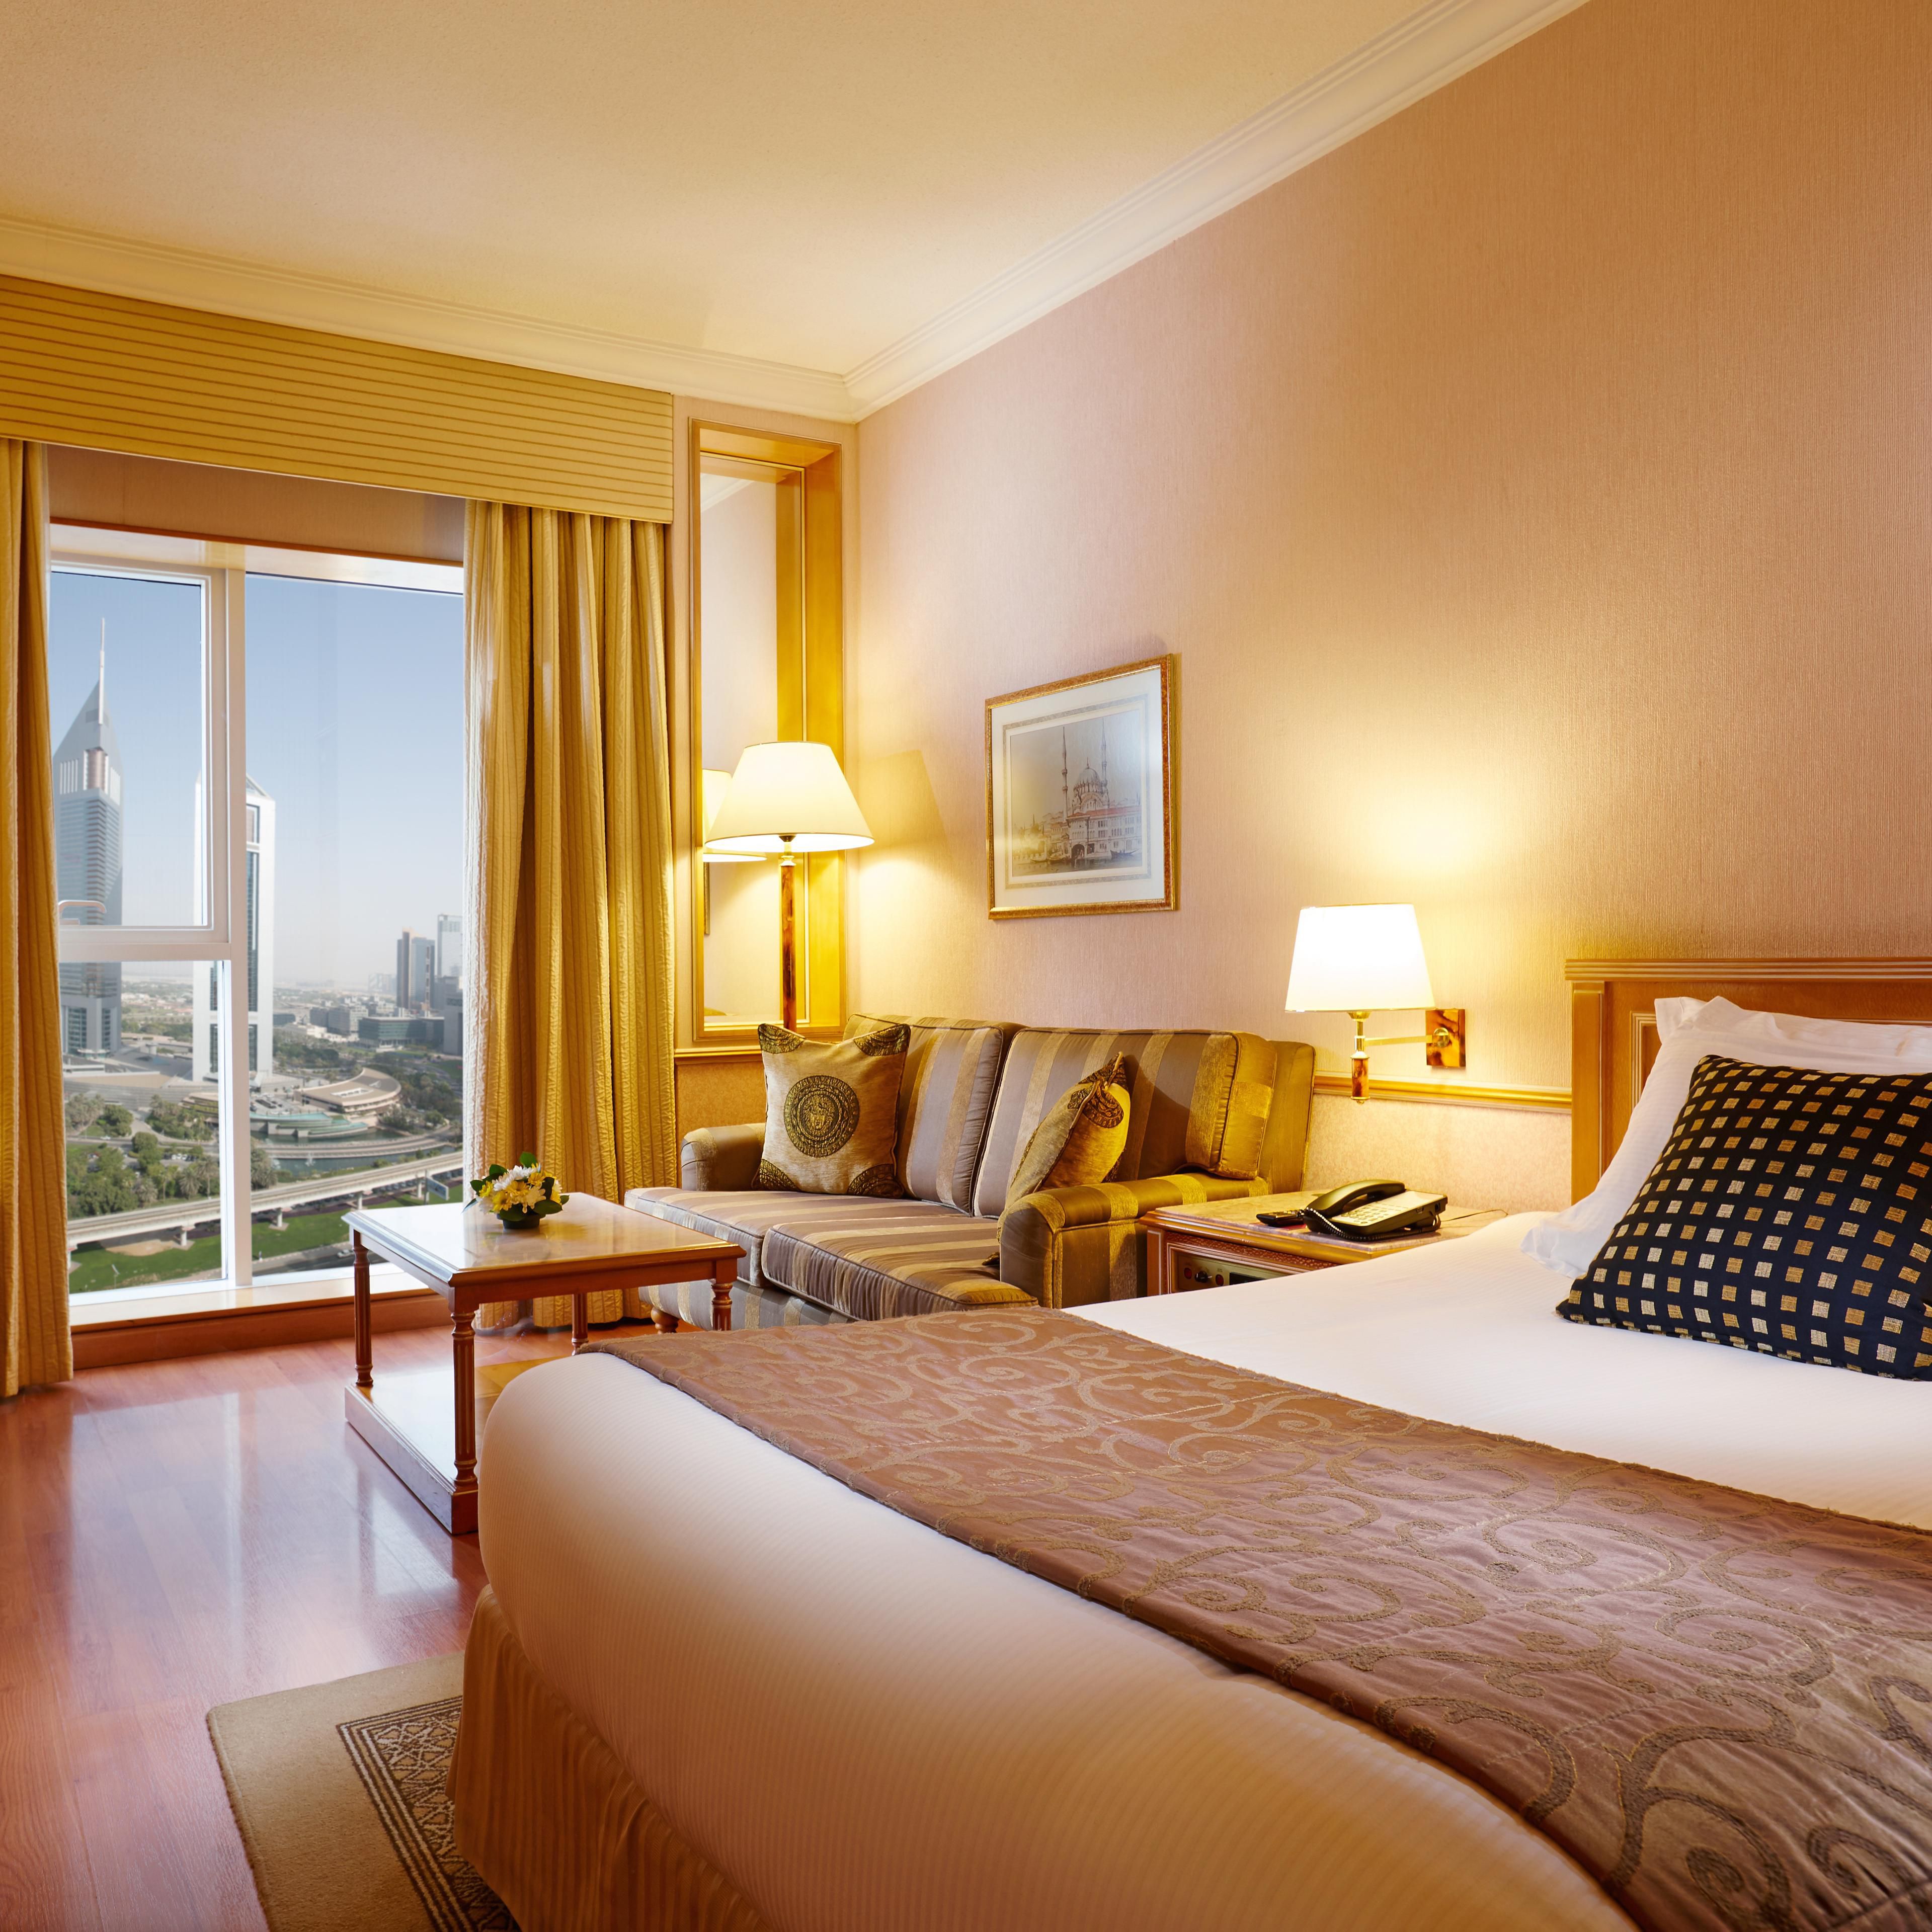 Business guests will find the Standard Room suited to their need